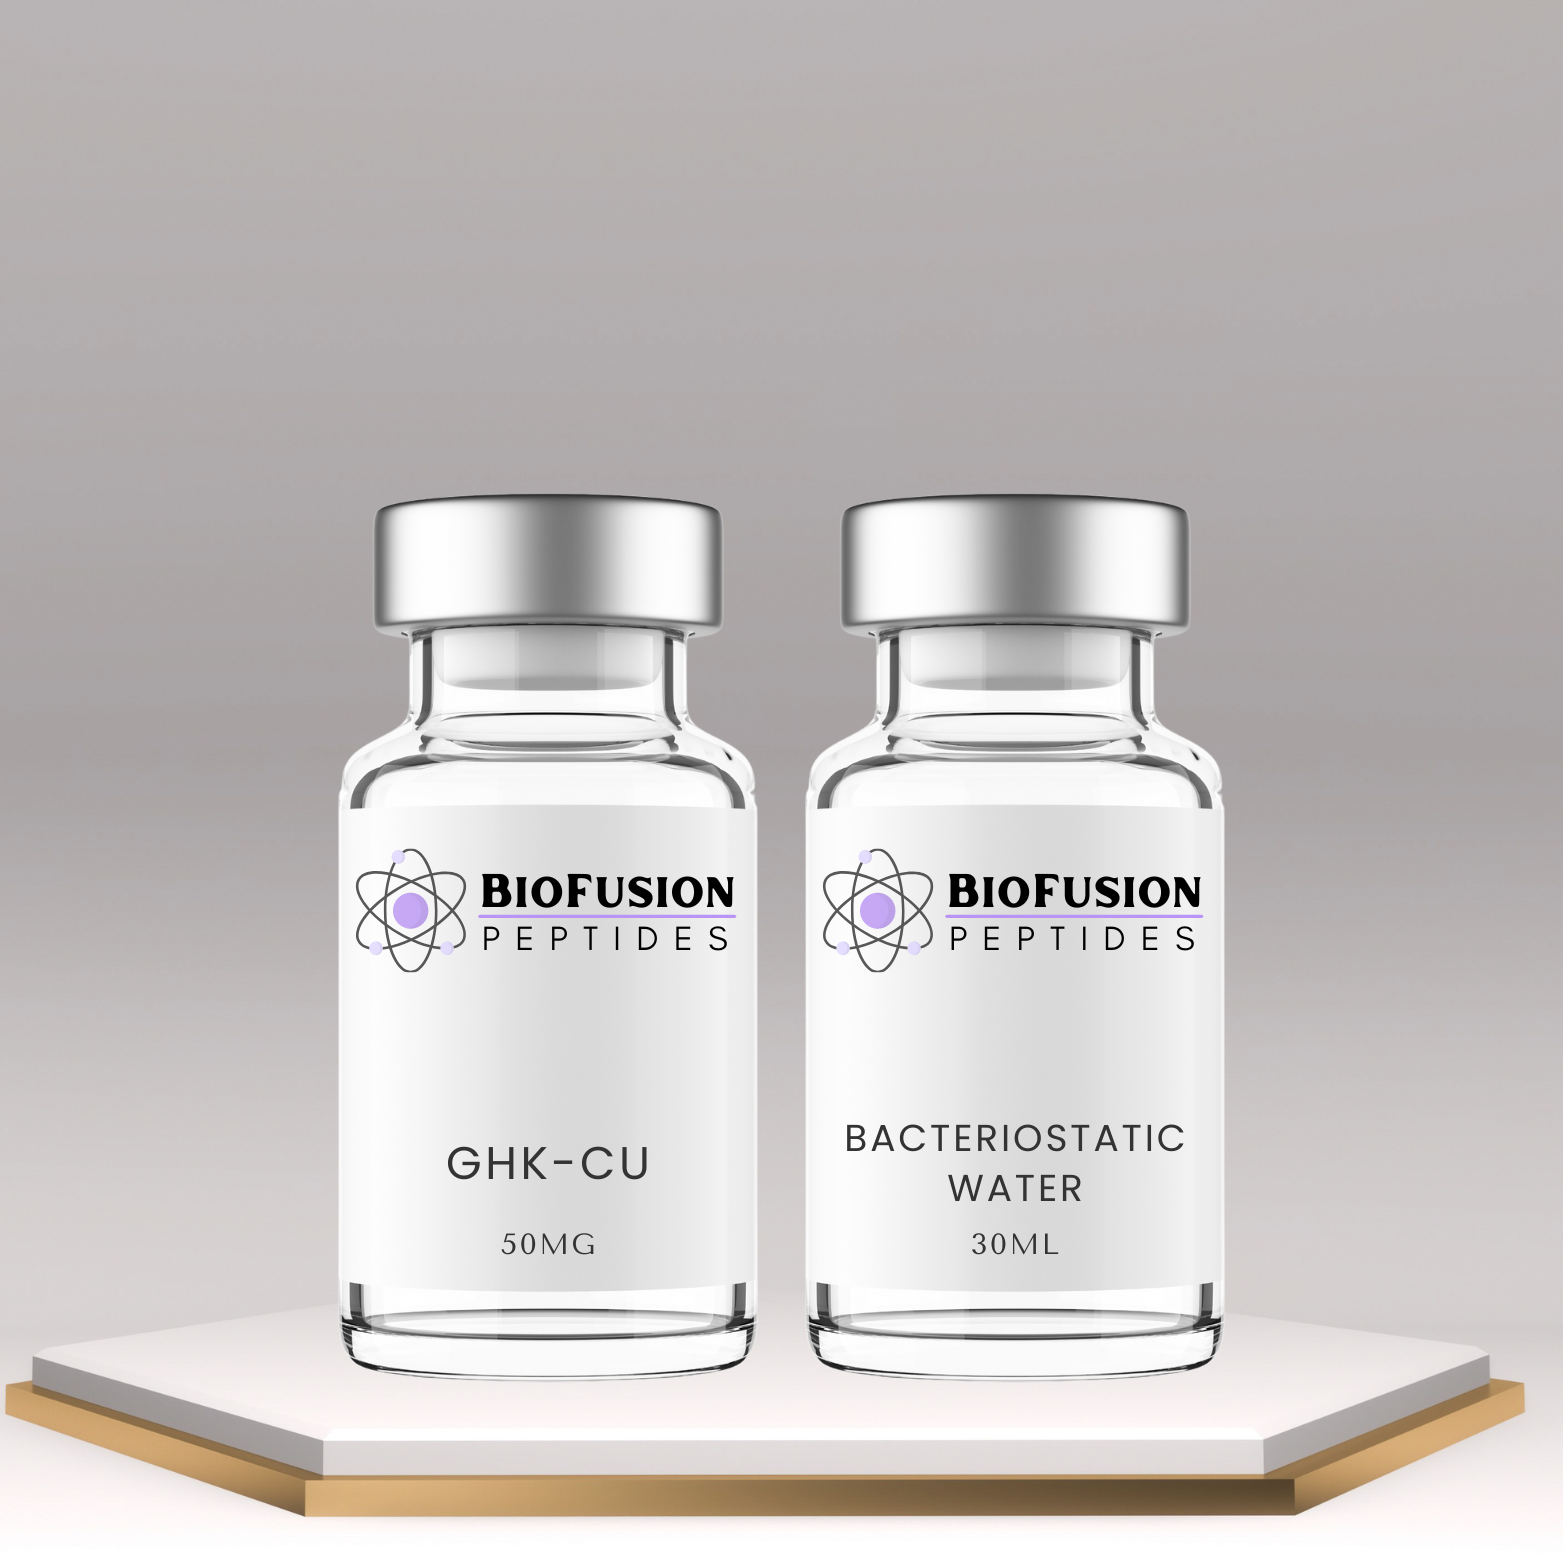 BioFusion Peptides GHK-Cu kit with bacteriostatic water